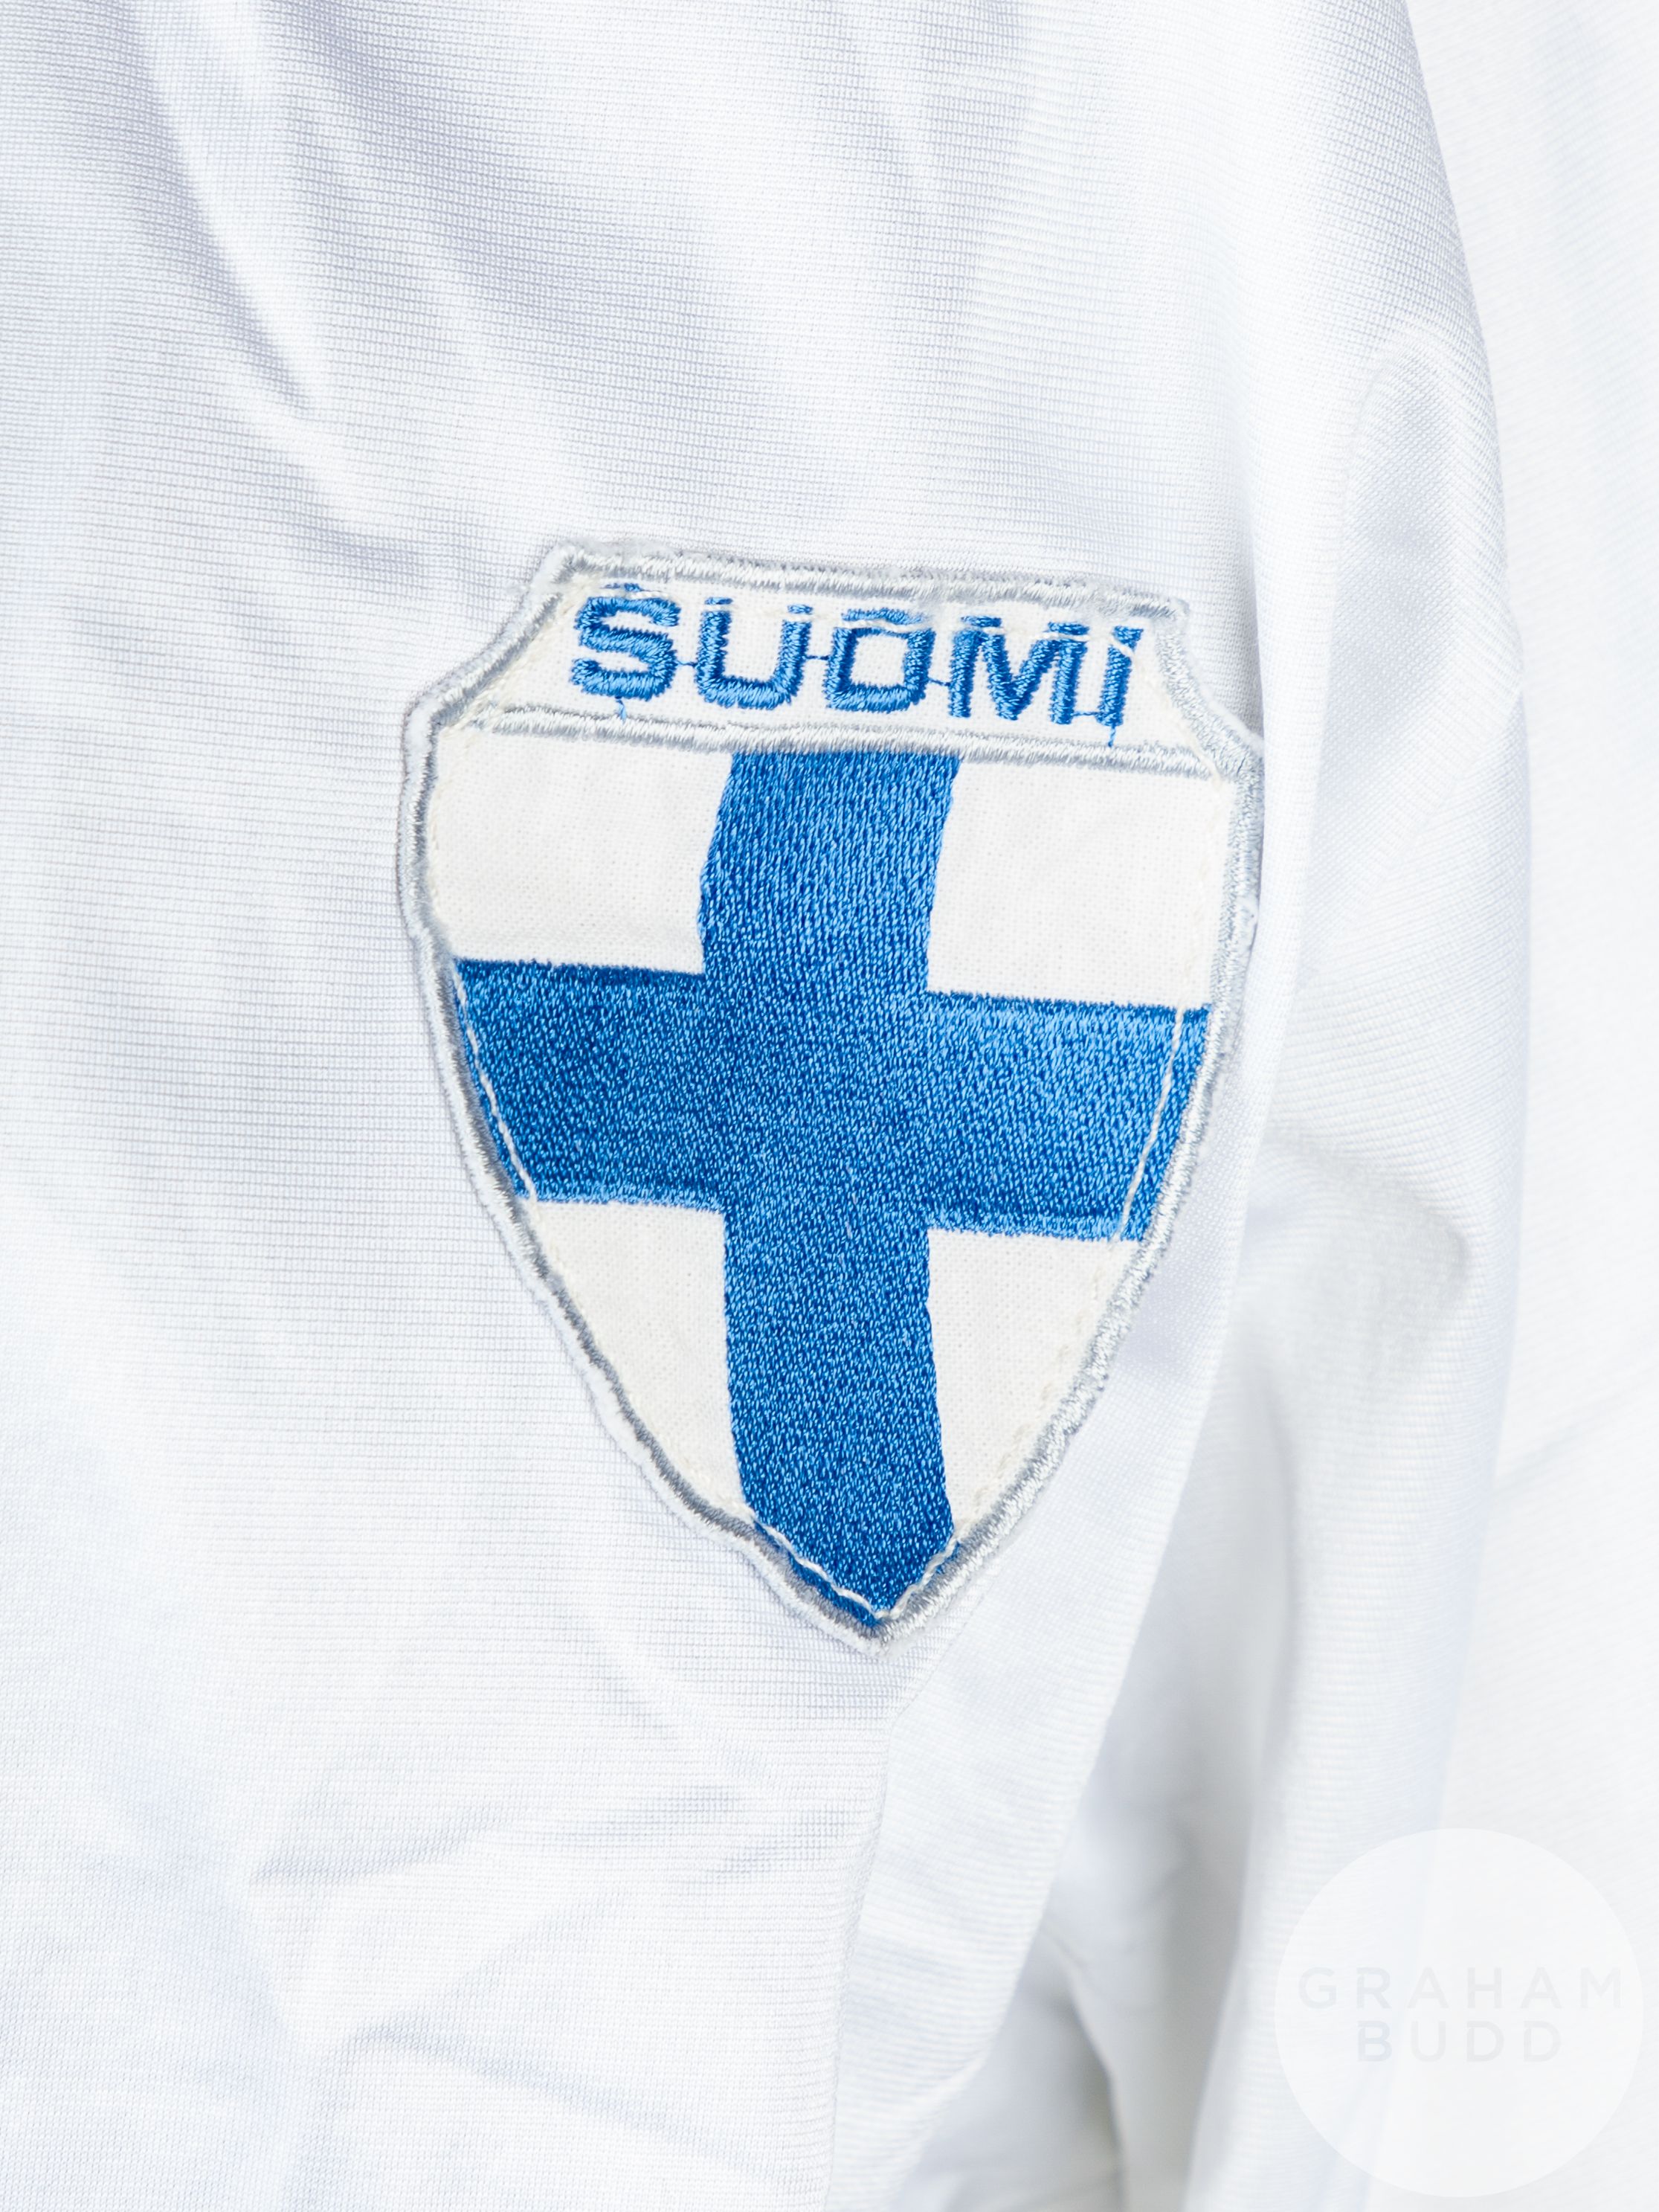 Erik Holmgren white and blue No.13 Finland match issued short-sleeved shirt - Image 3 of 4